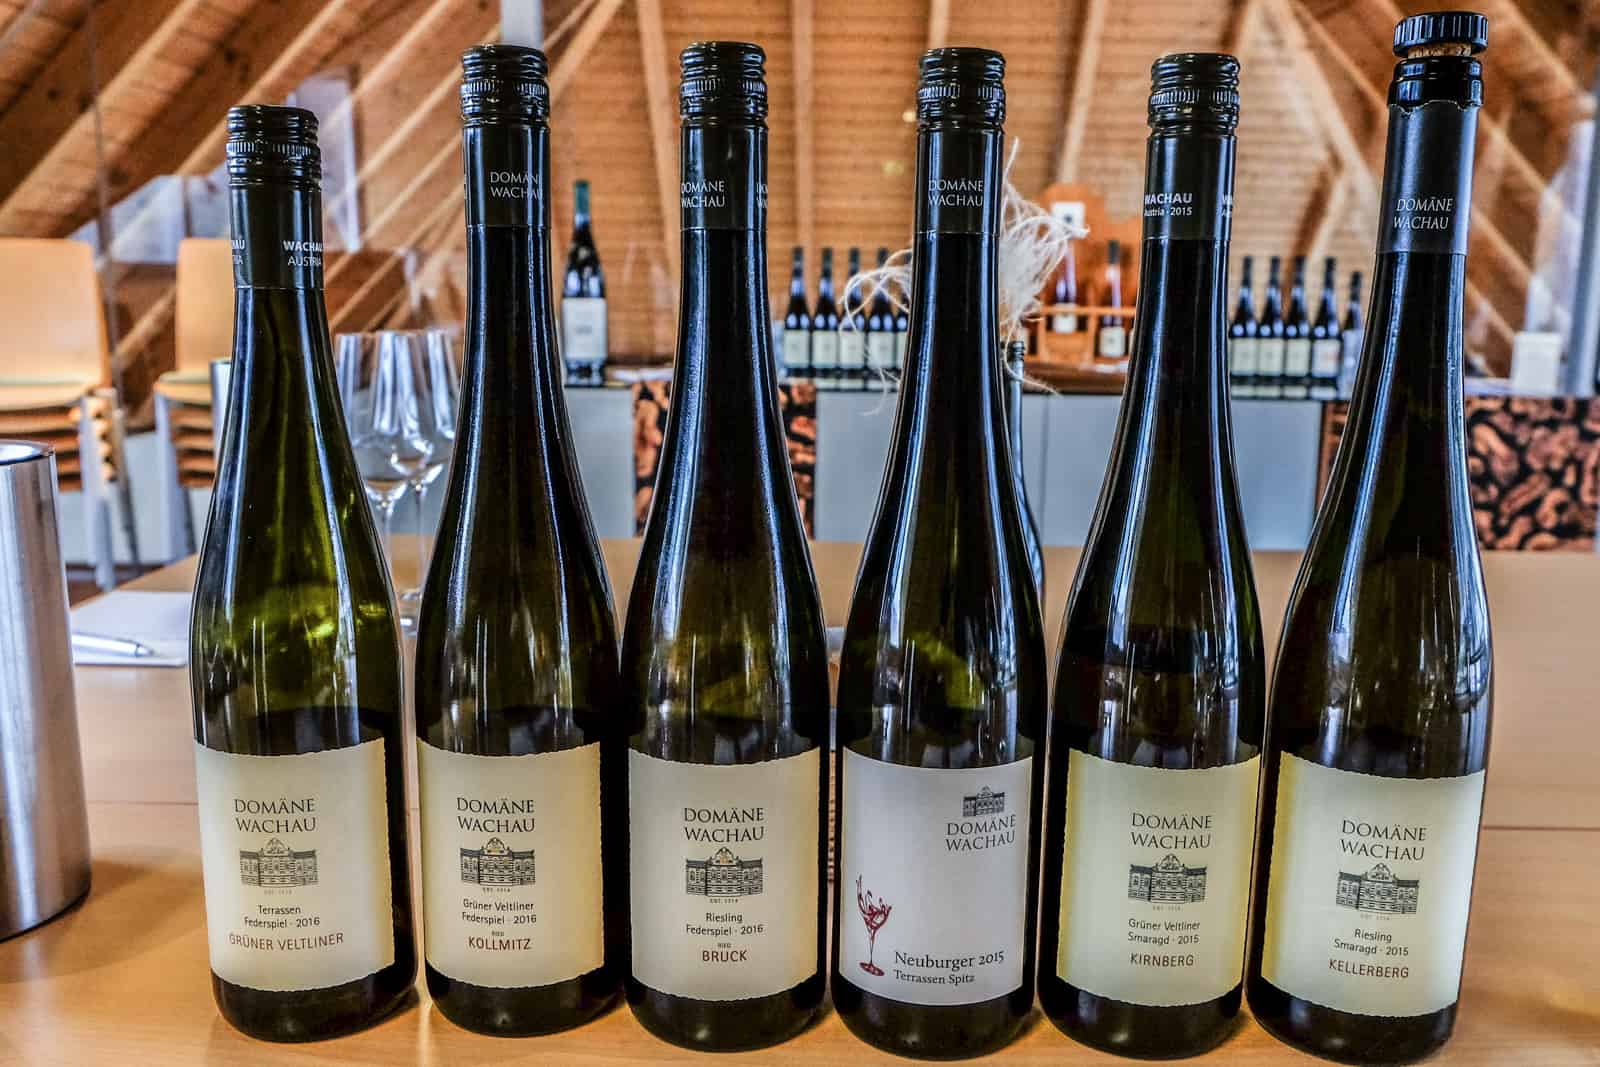 A row of six bottles of wine at the Domäne Wachau wine during a wine tasting session